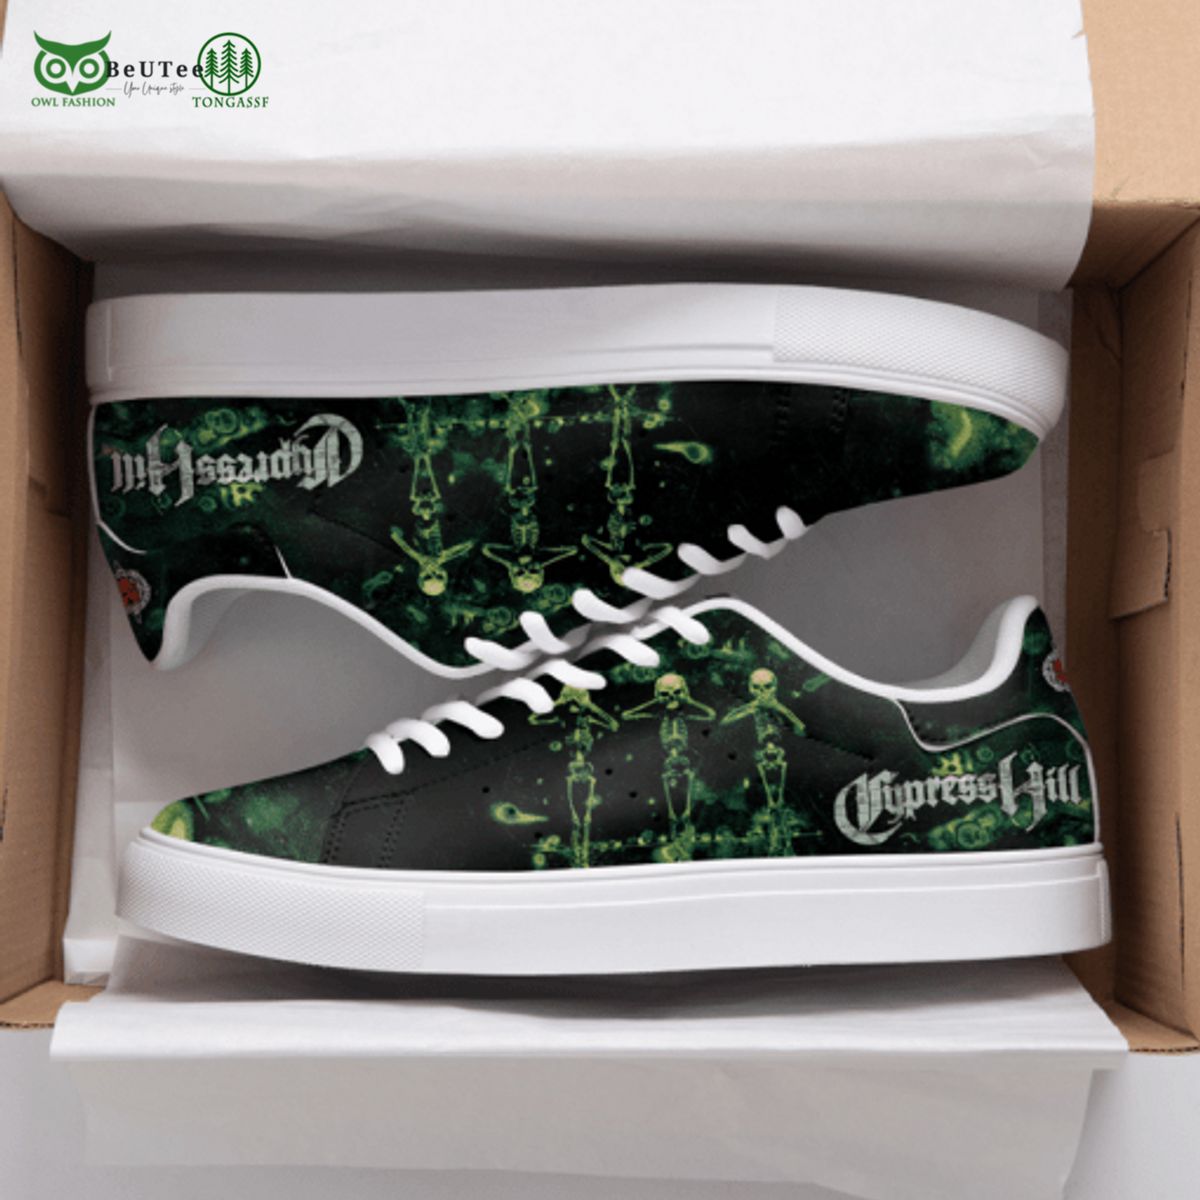 cypress hill hiphop group green stan smith shoes 1 AdZeP